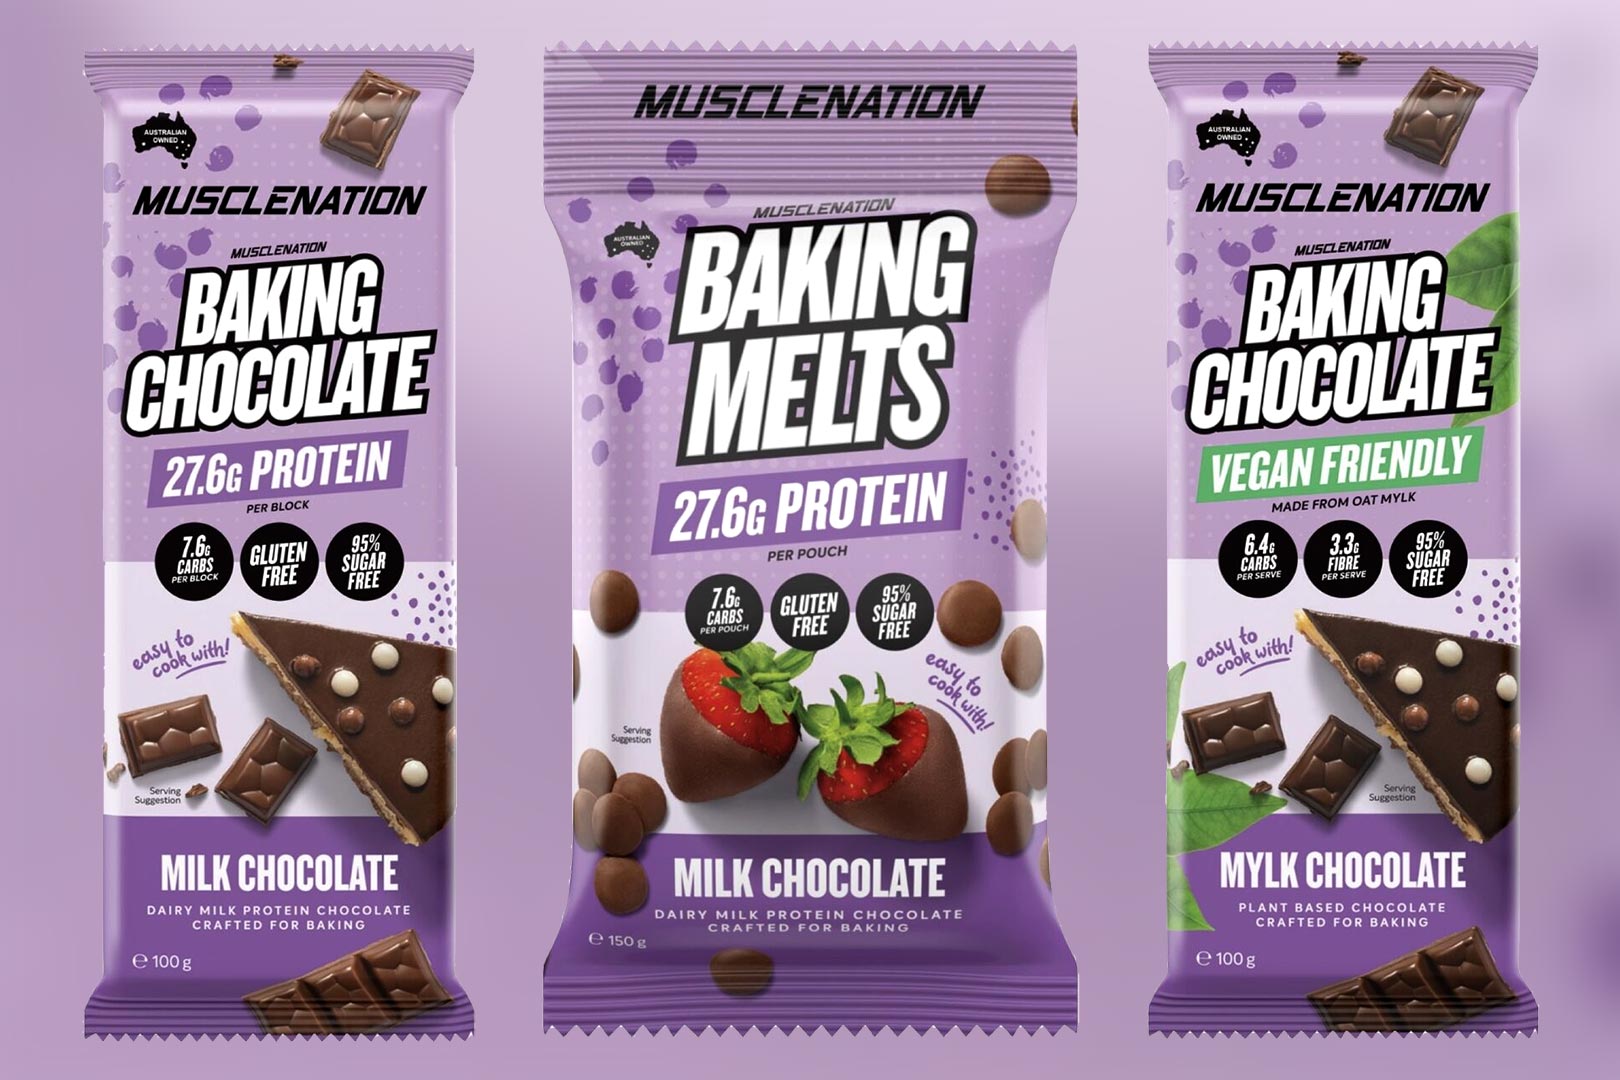 Muscle Nation Baking Chocolate